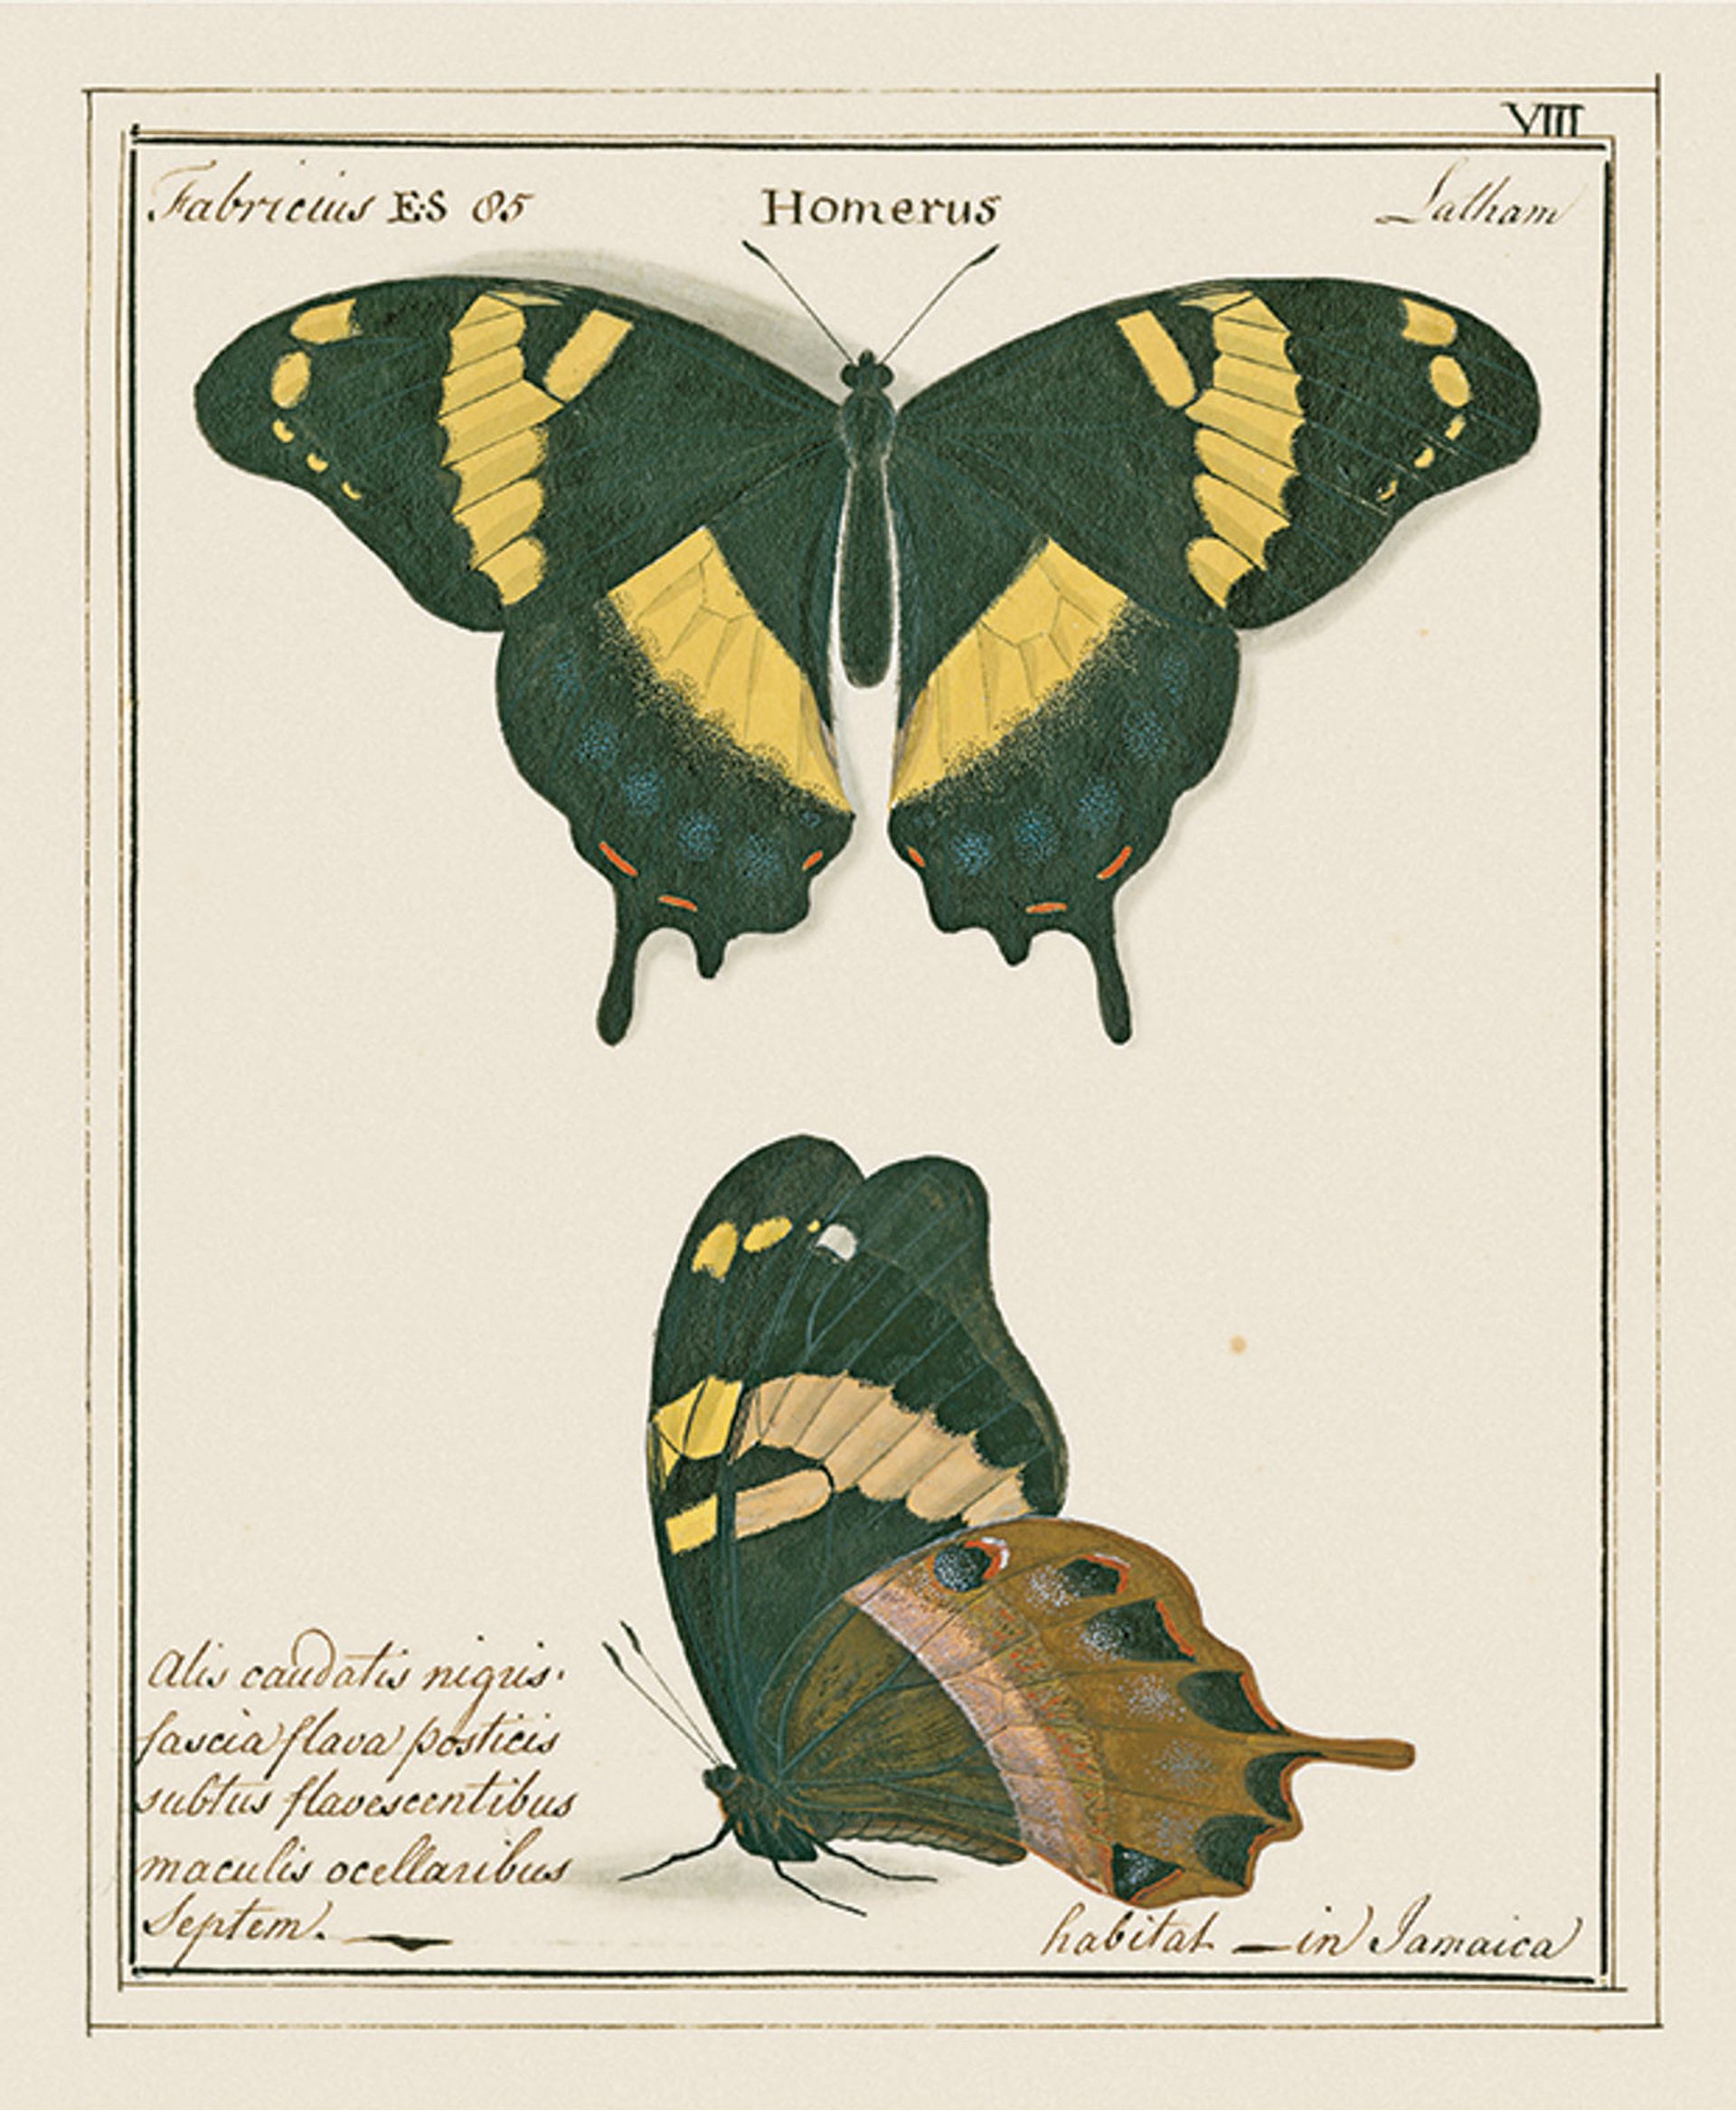 Papilio homerus, found only in Jamaica, is protected as an endangered species University of Oxford, Museum of Natural History